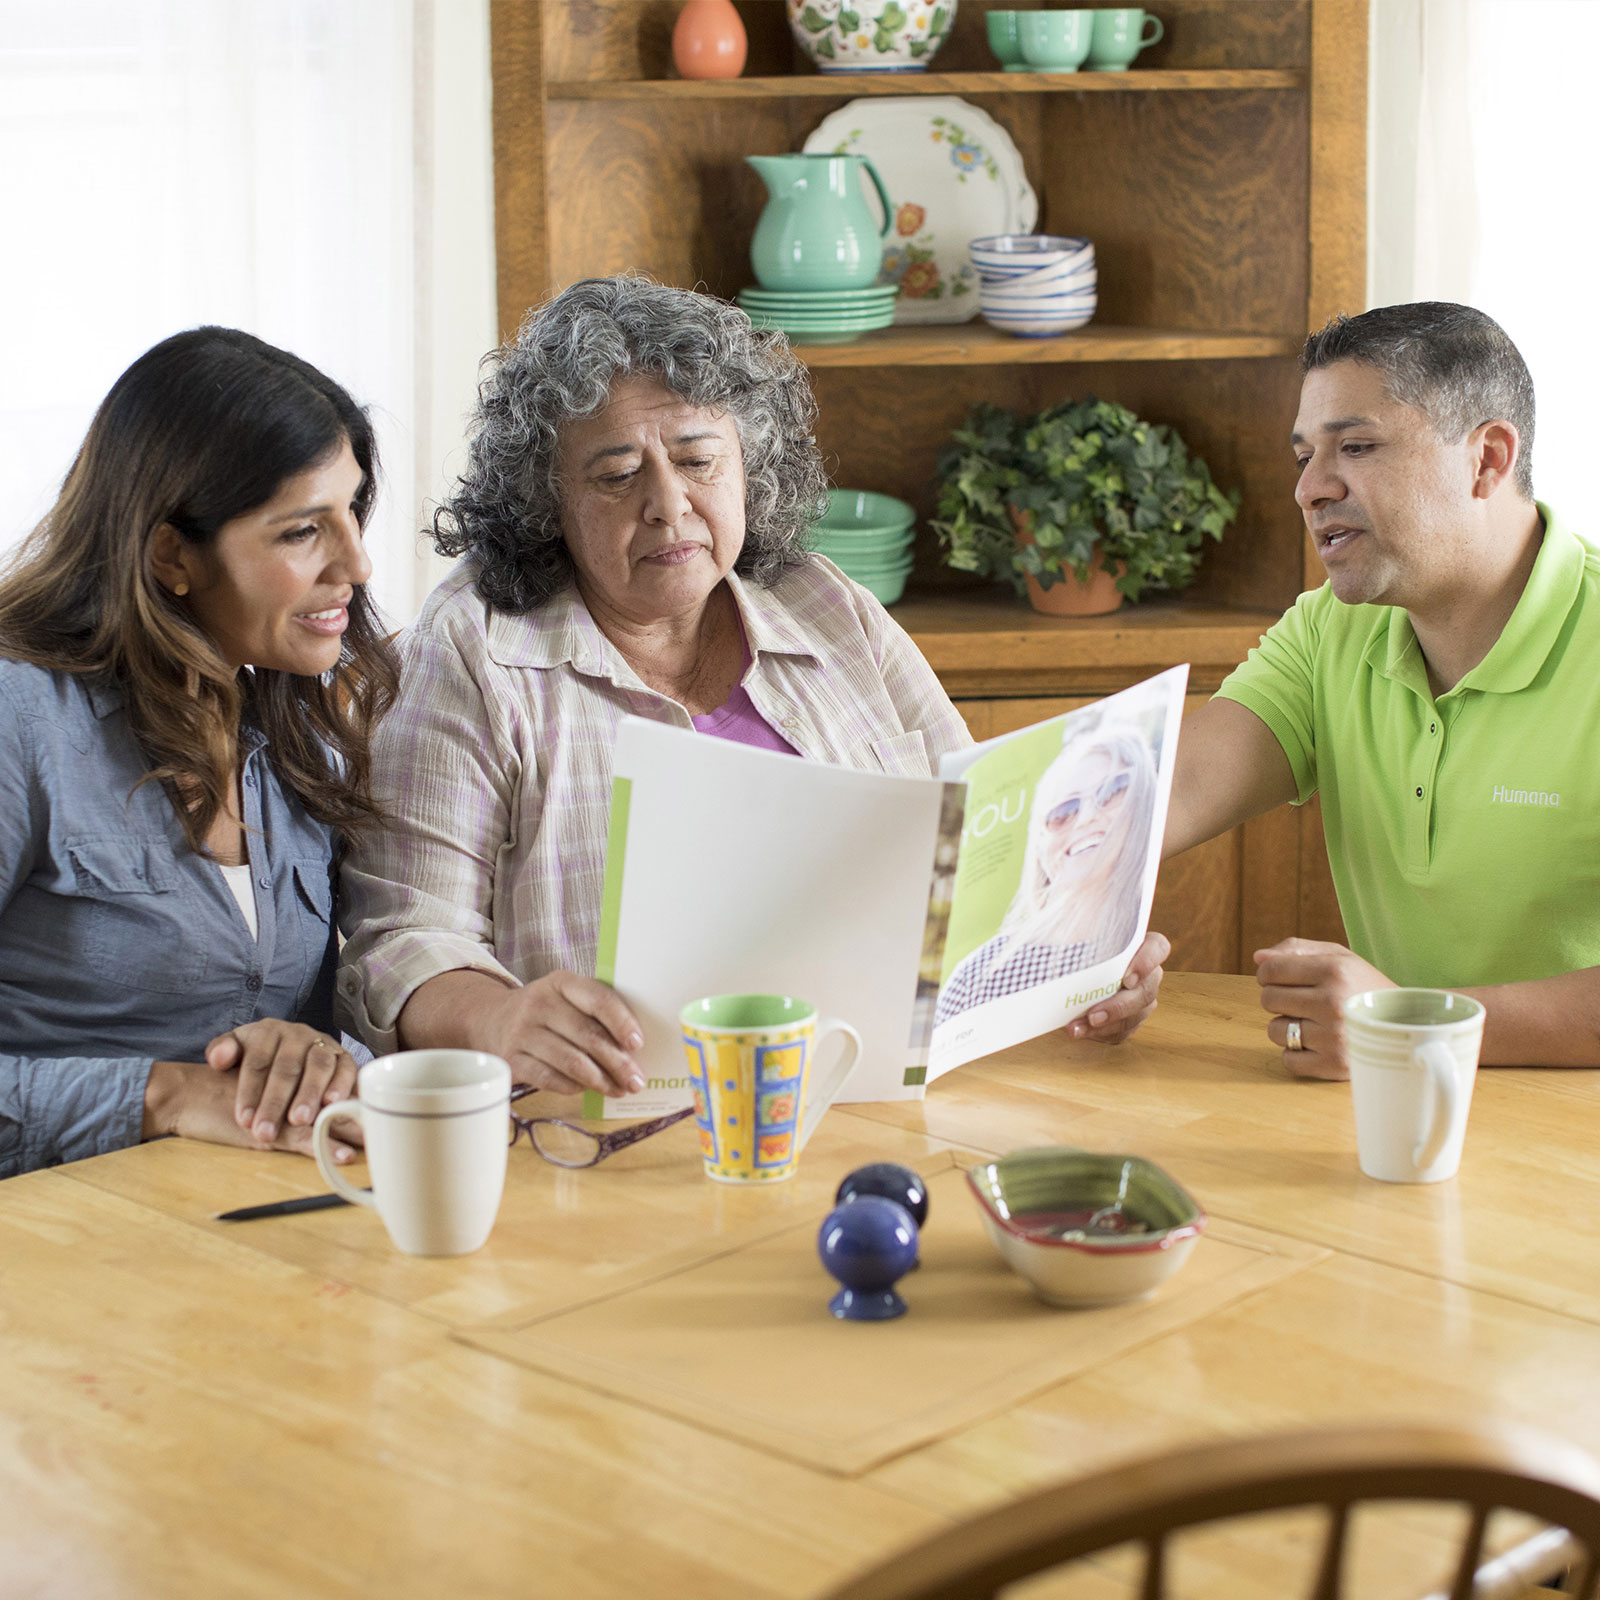 A Humana agent consults a family while they read a pamphlet.